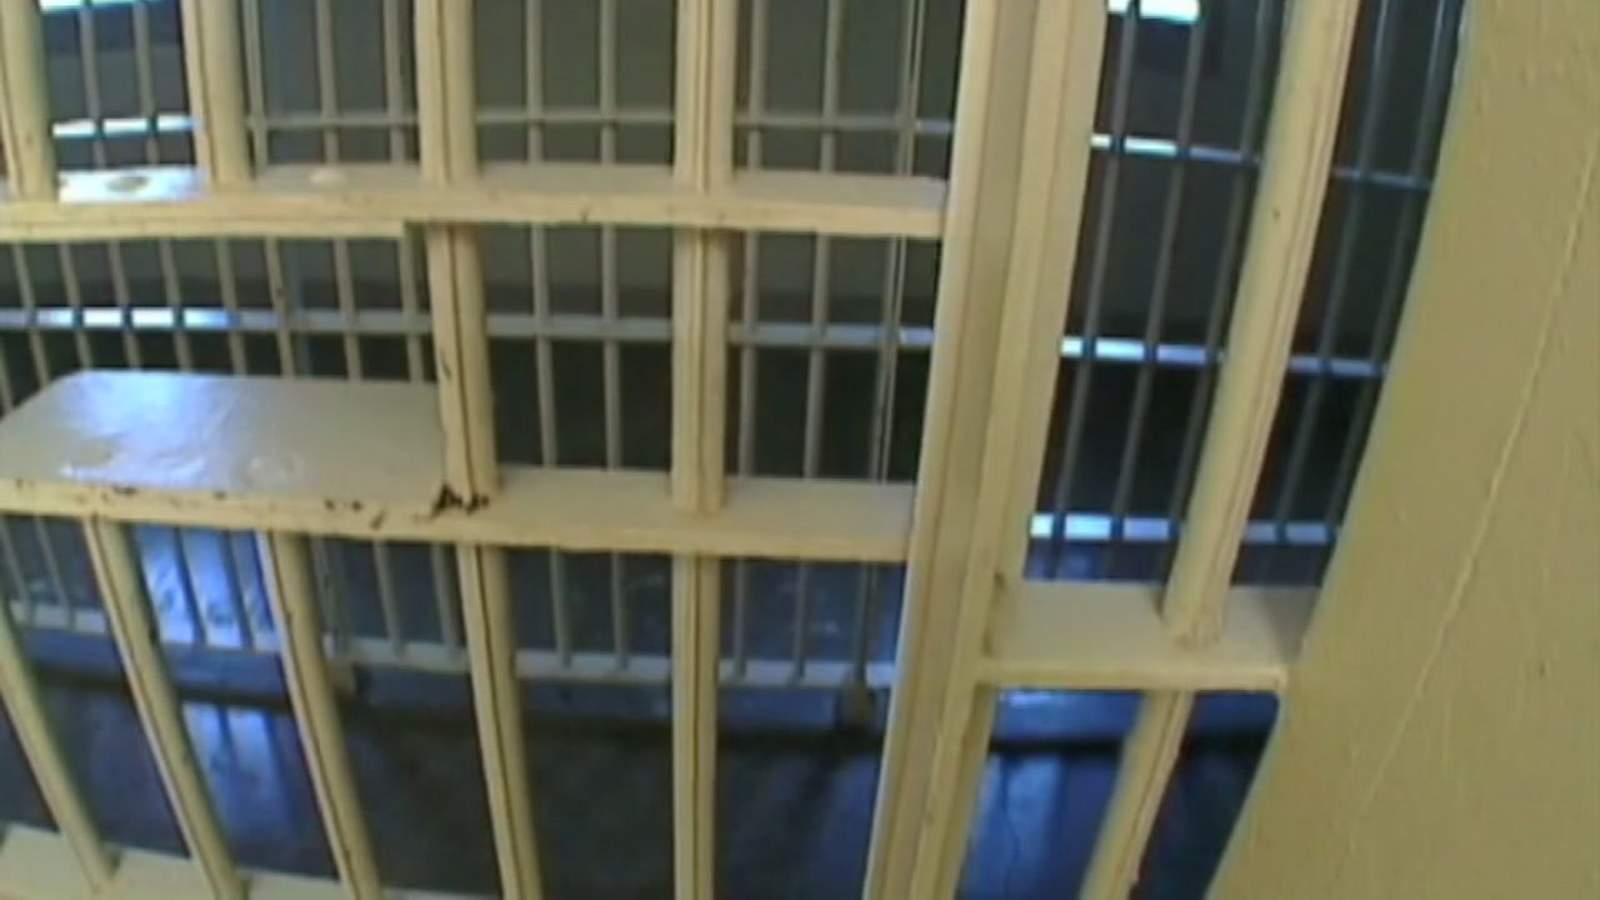 Inmate, 79, killed in attack at Florida prison